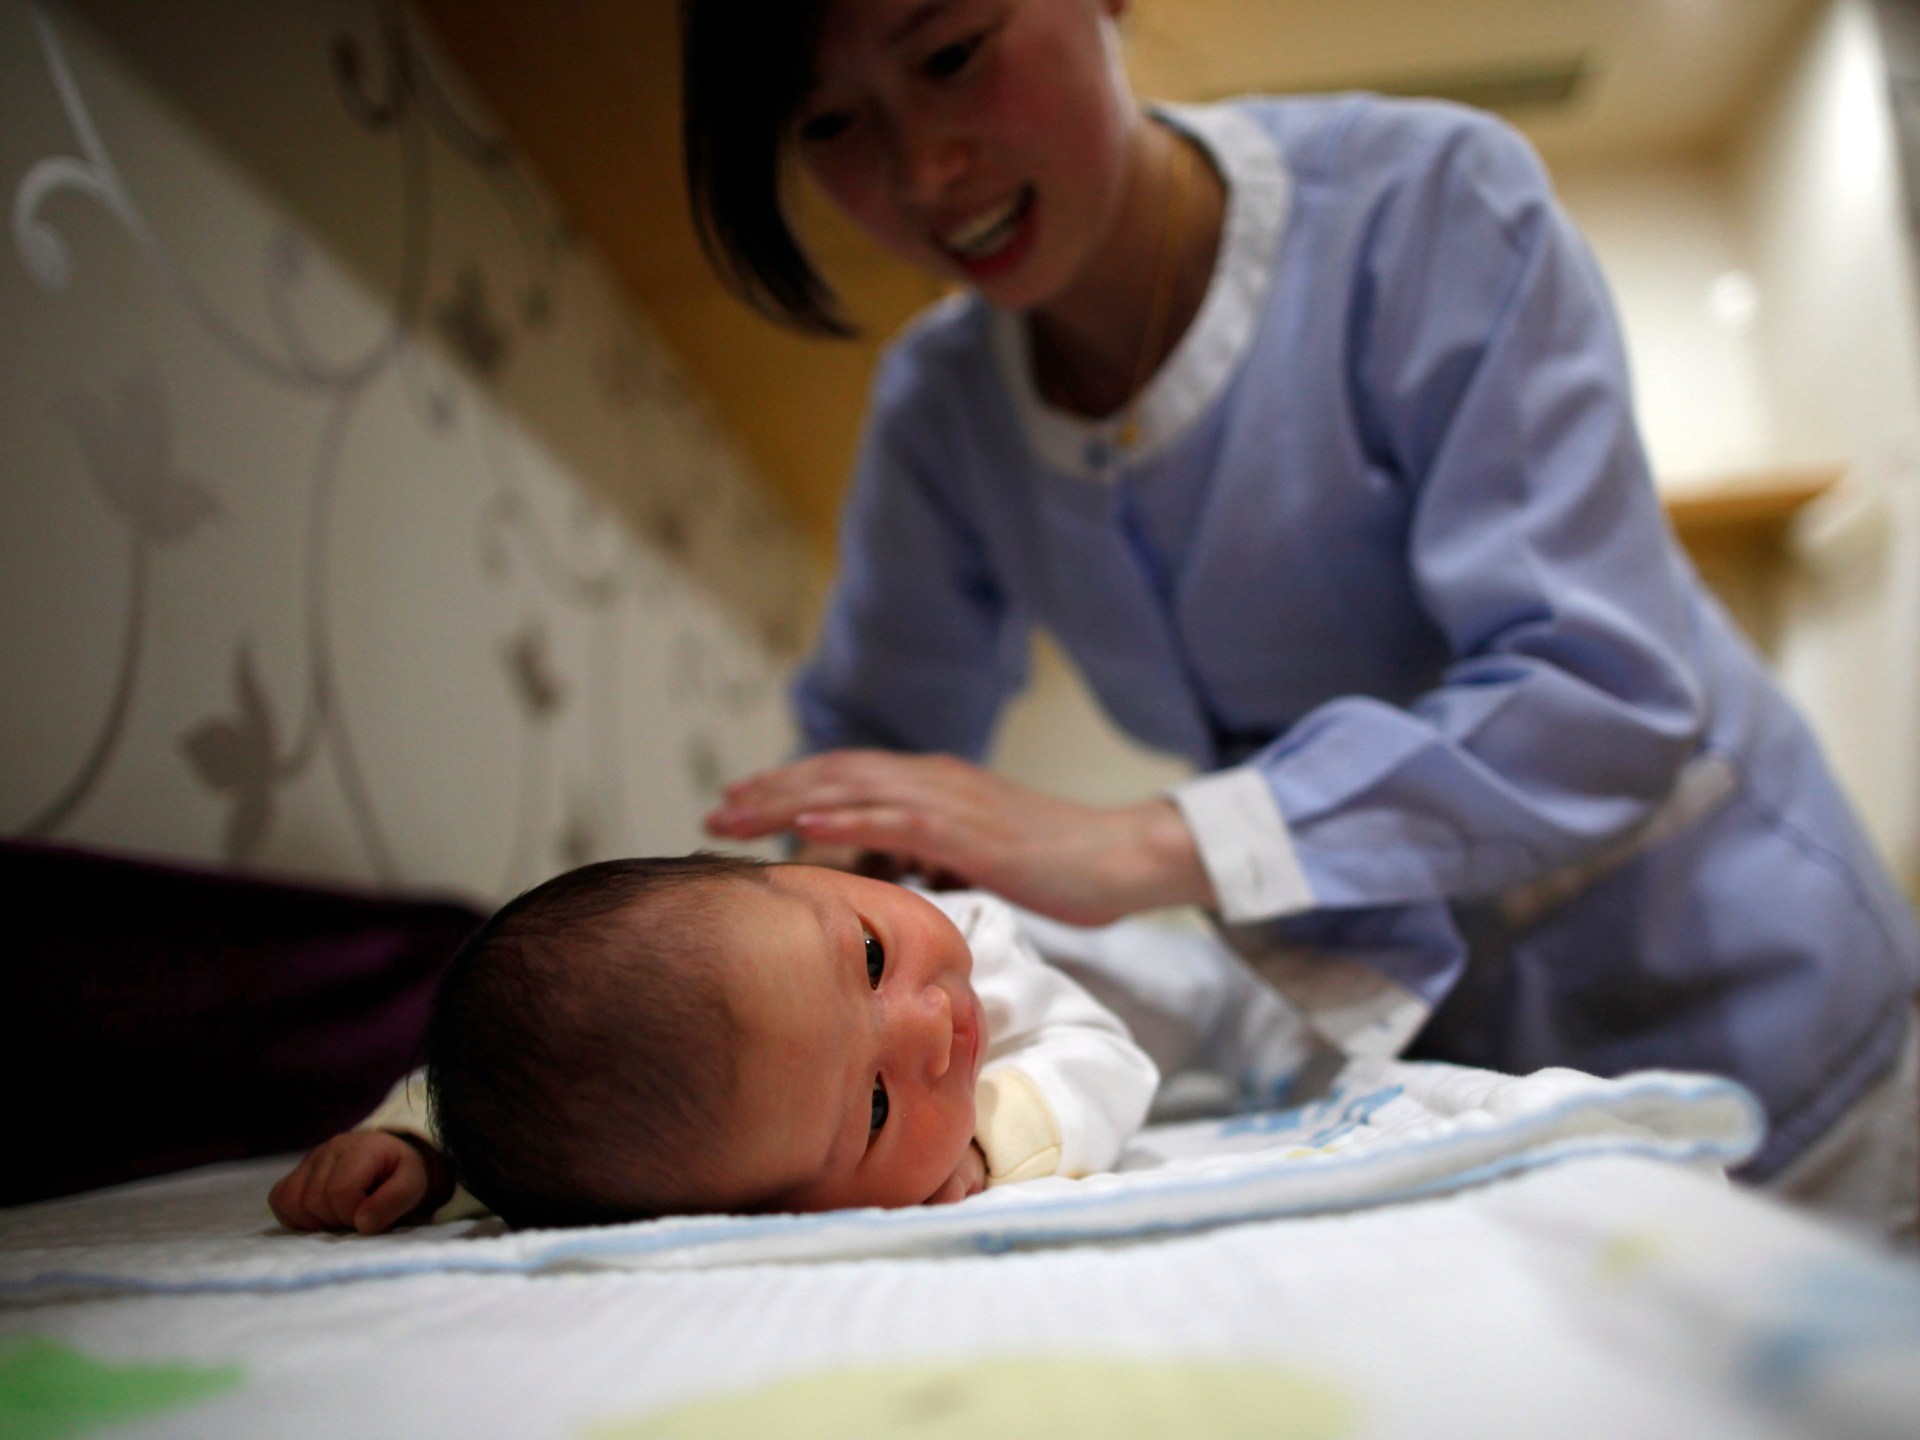 Obstetric winter: Why are Chinas hospitals shutting delivery wards? | Health News [Video]